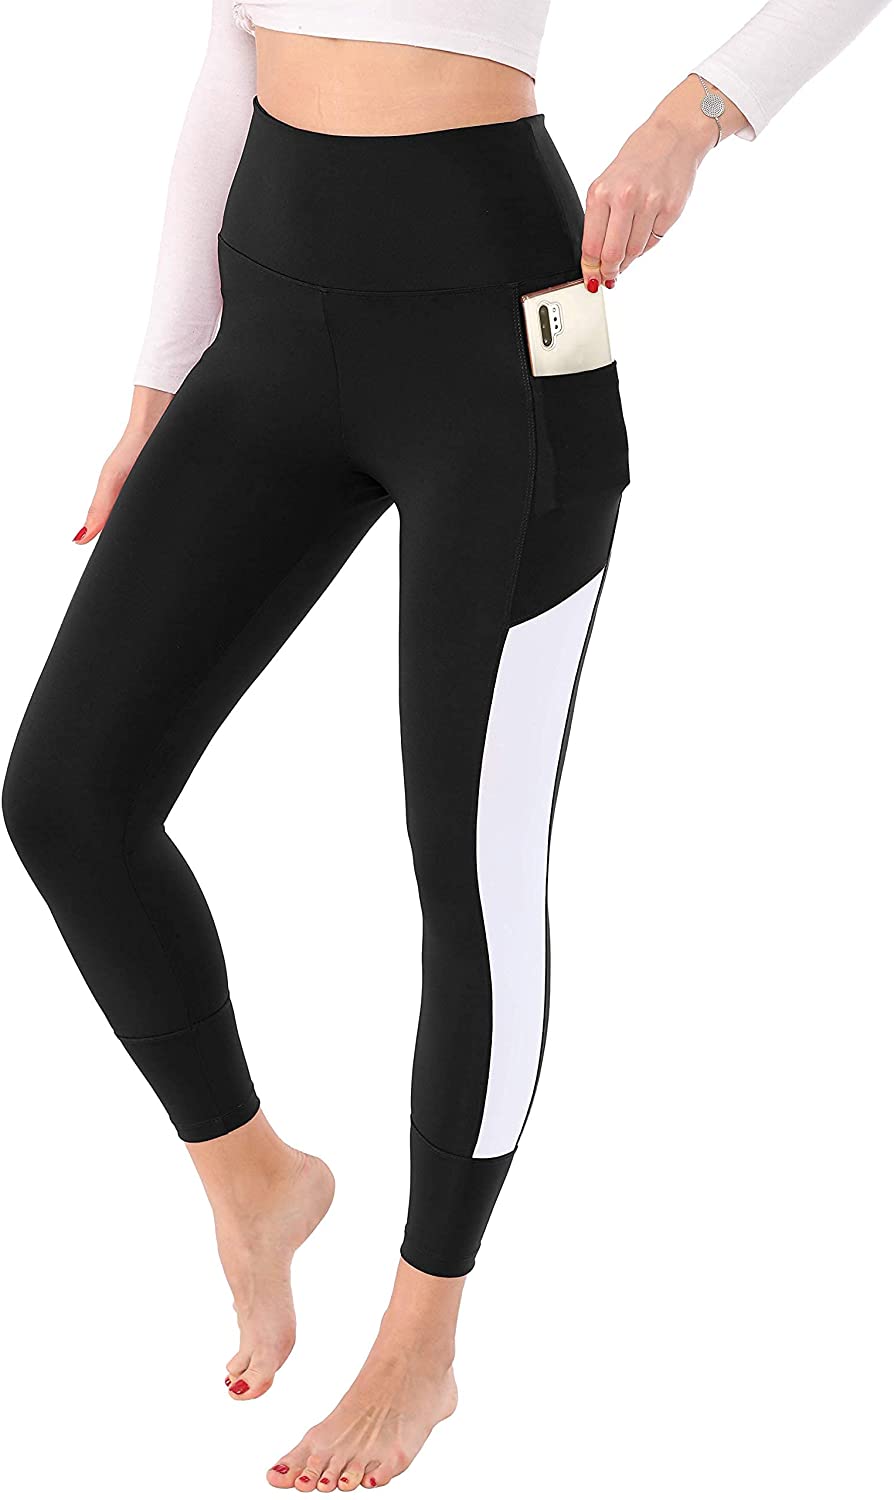 trilece Womens Leggings and Yoga Pants High Waisted with Pockets Tummy Control Athletic Soft Seamless for Workout Running 